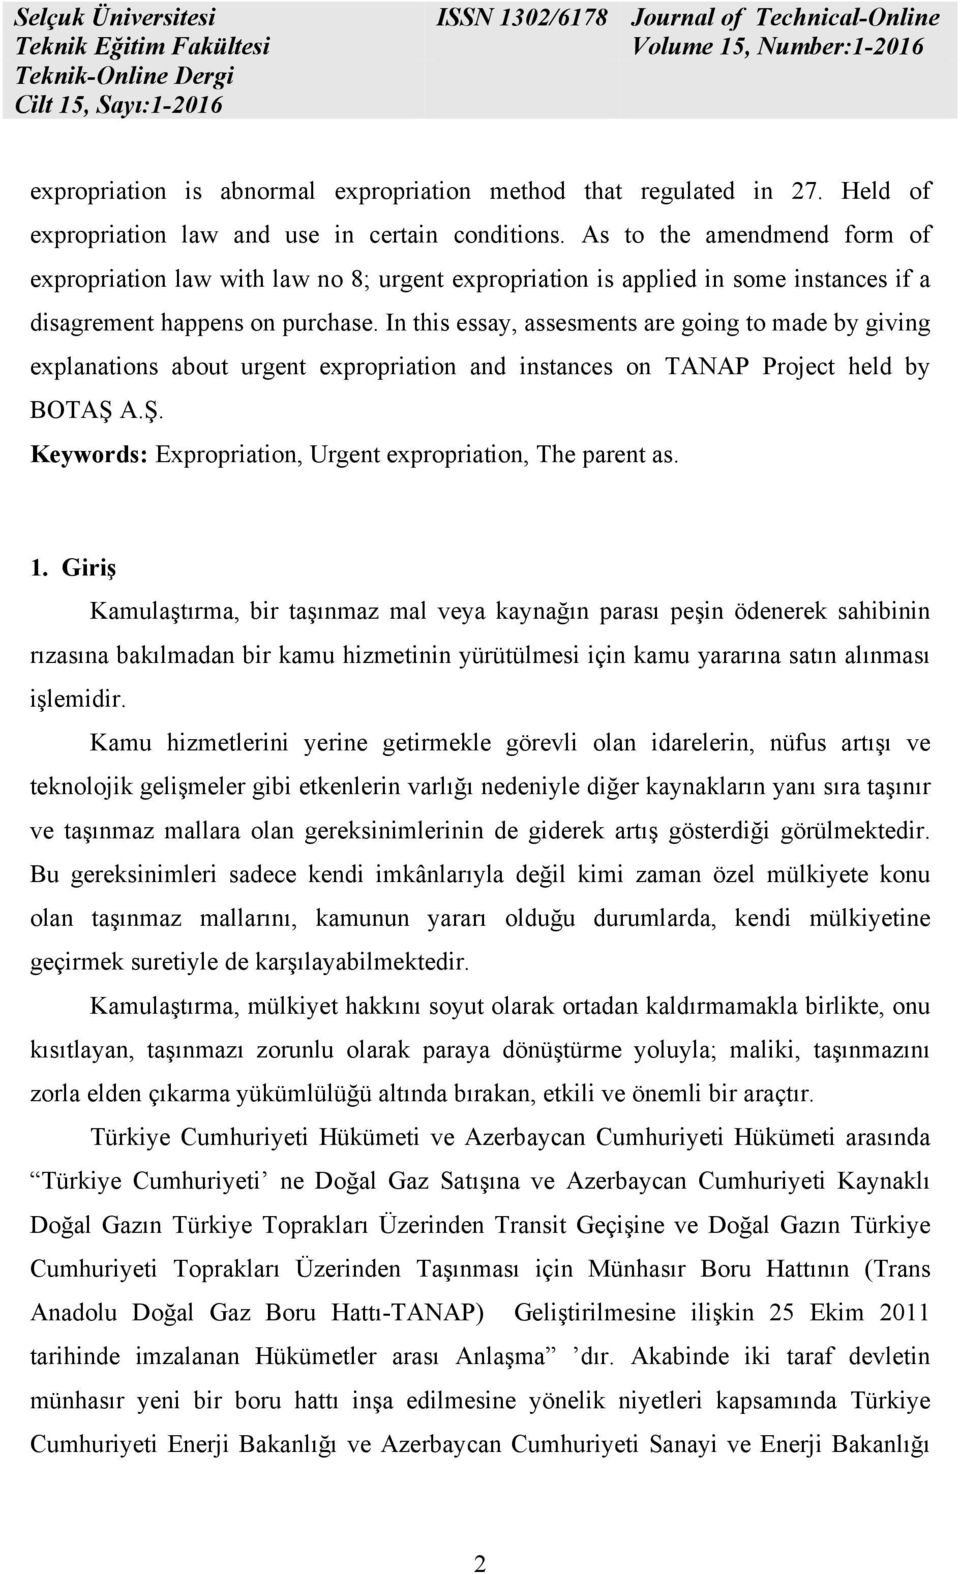 In this essay, assesments are going to made by giving explanations about urgent expropriation and instances on TANAP Project held by BOTAŞ 